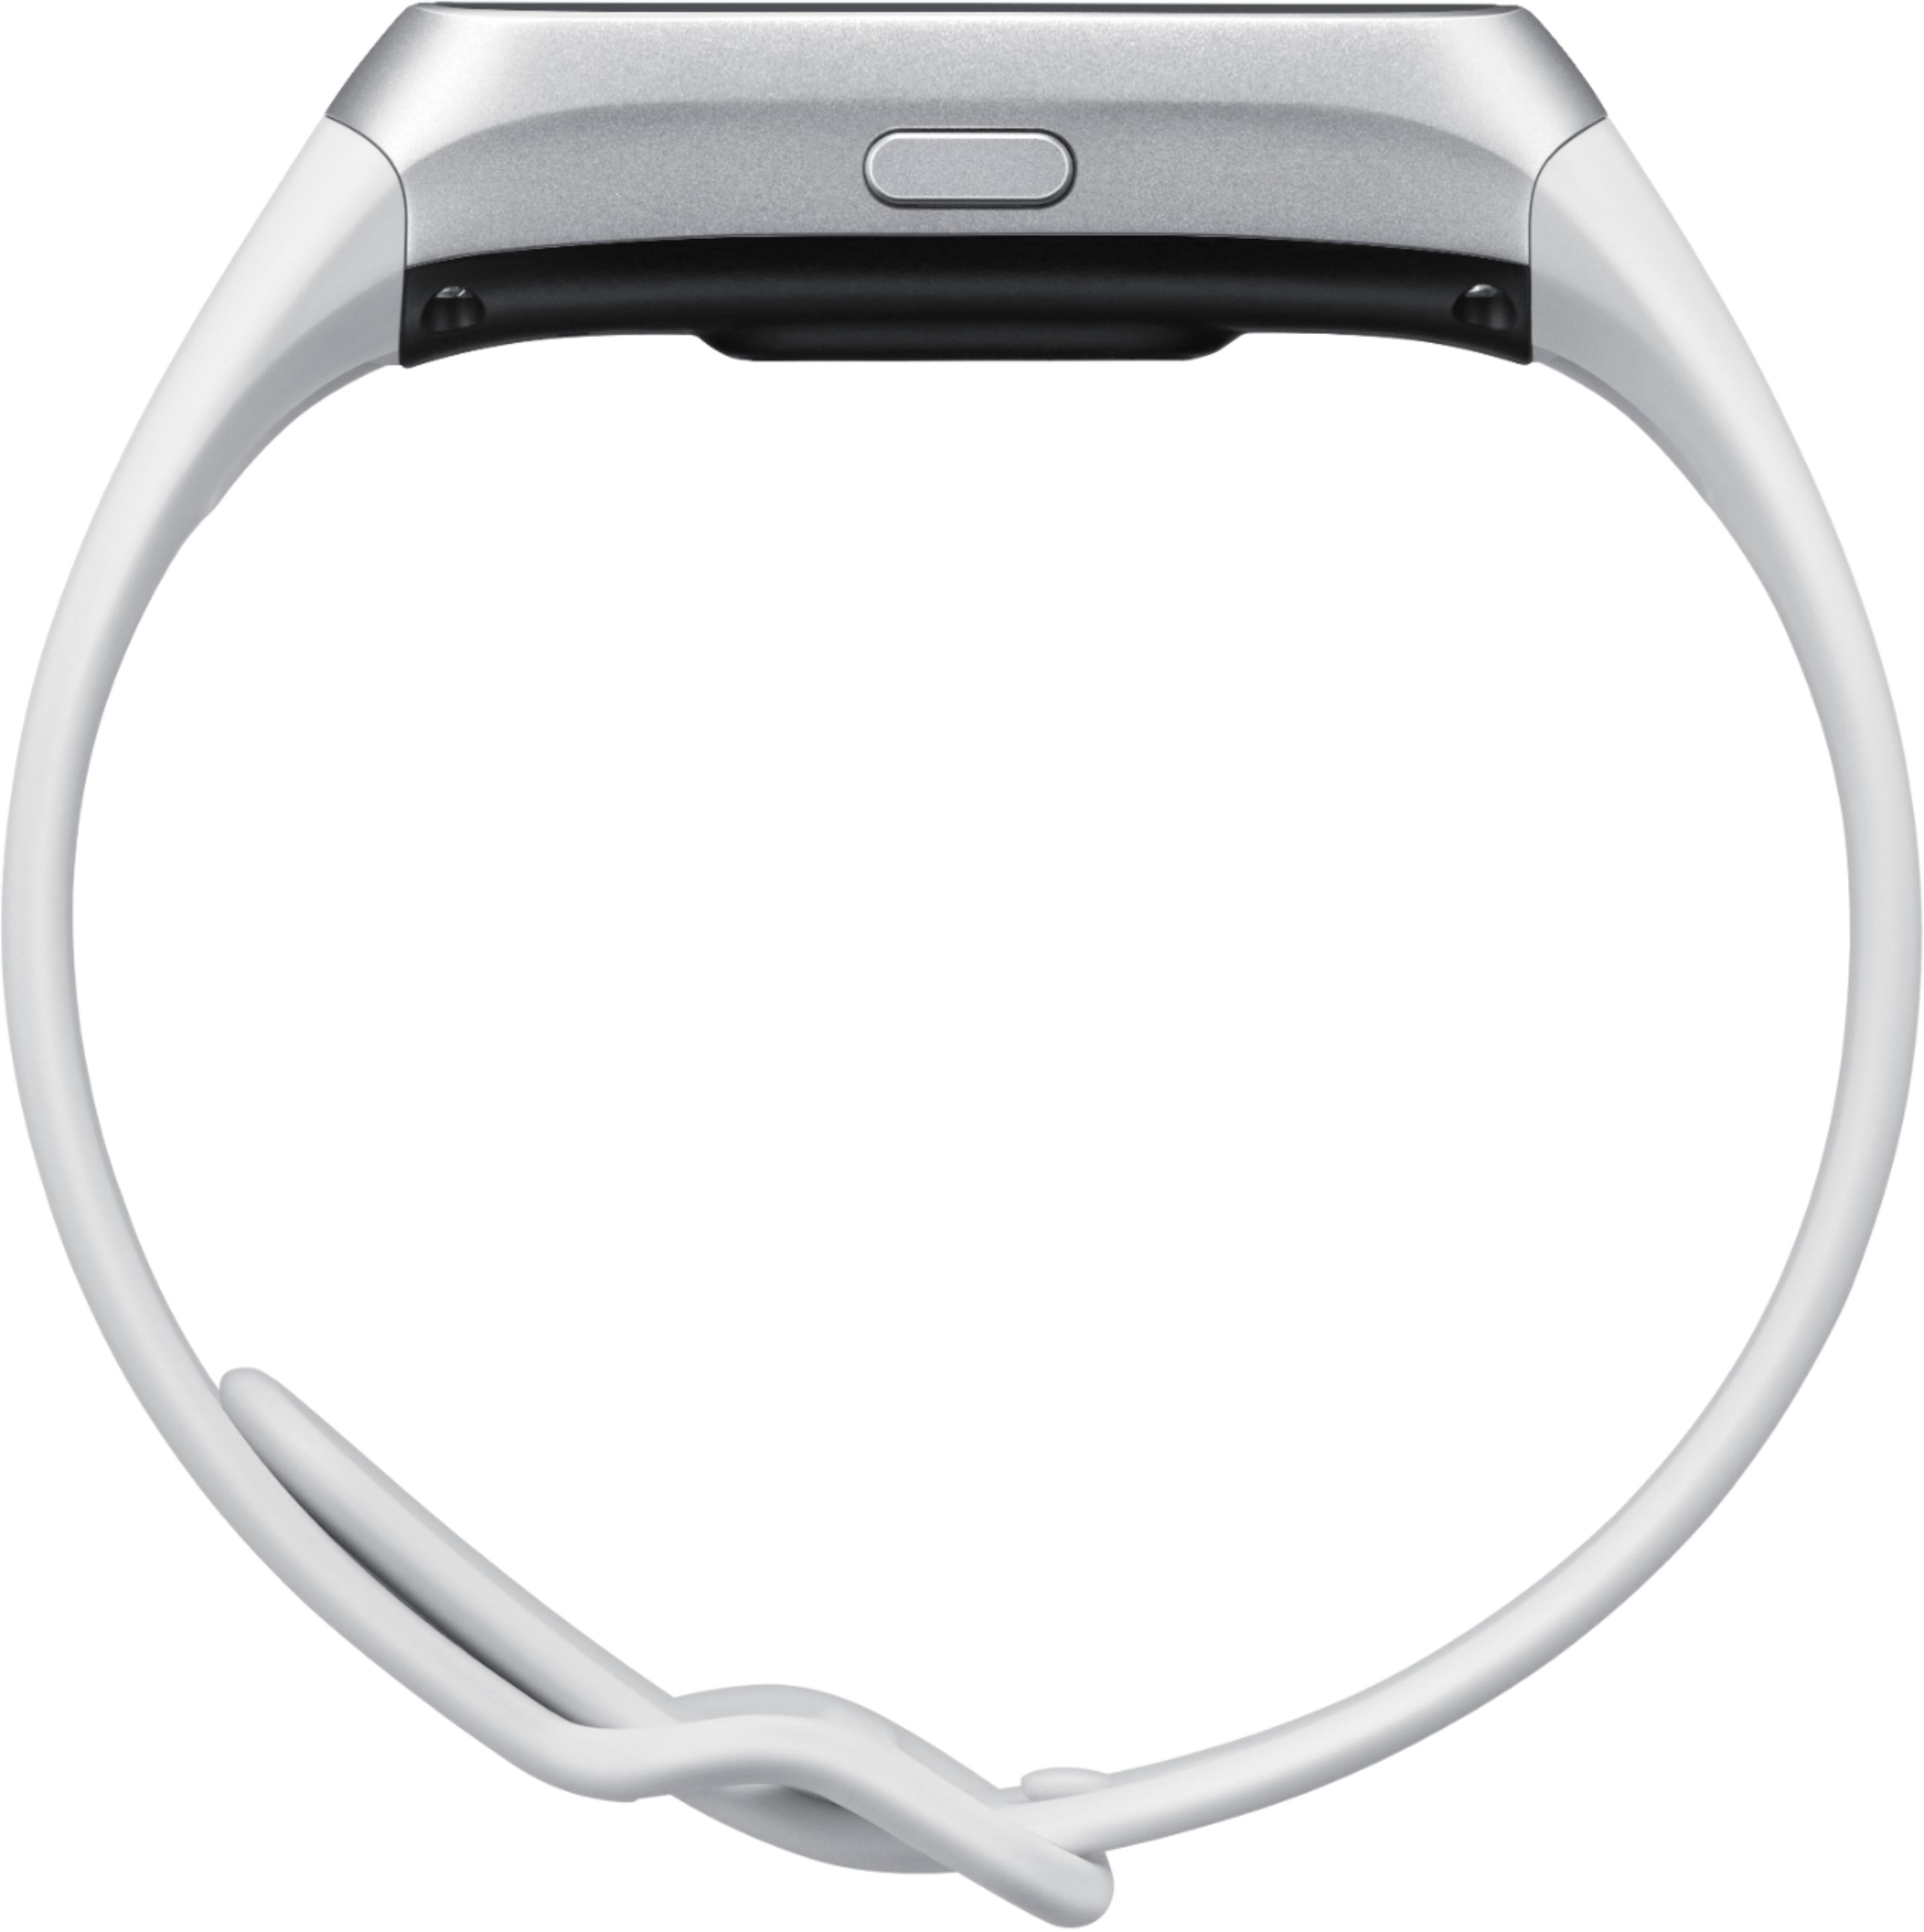 Best Buy: Samsung Geek Squad Certified Refurbished Galaxy Fit Activity ...